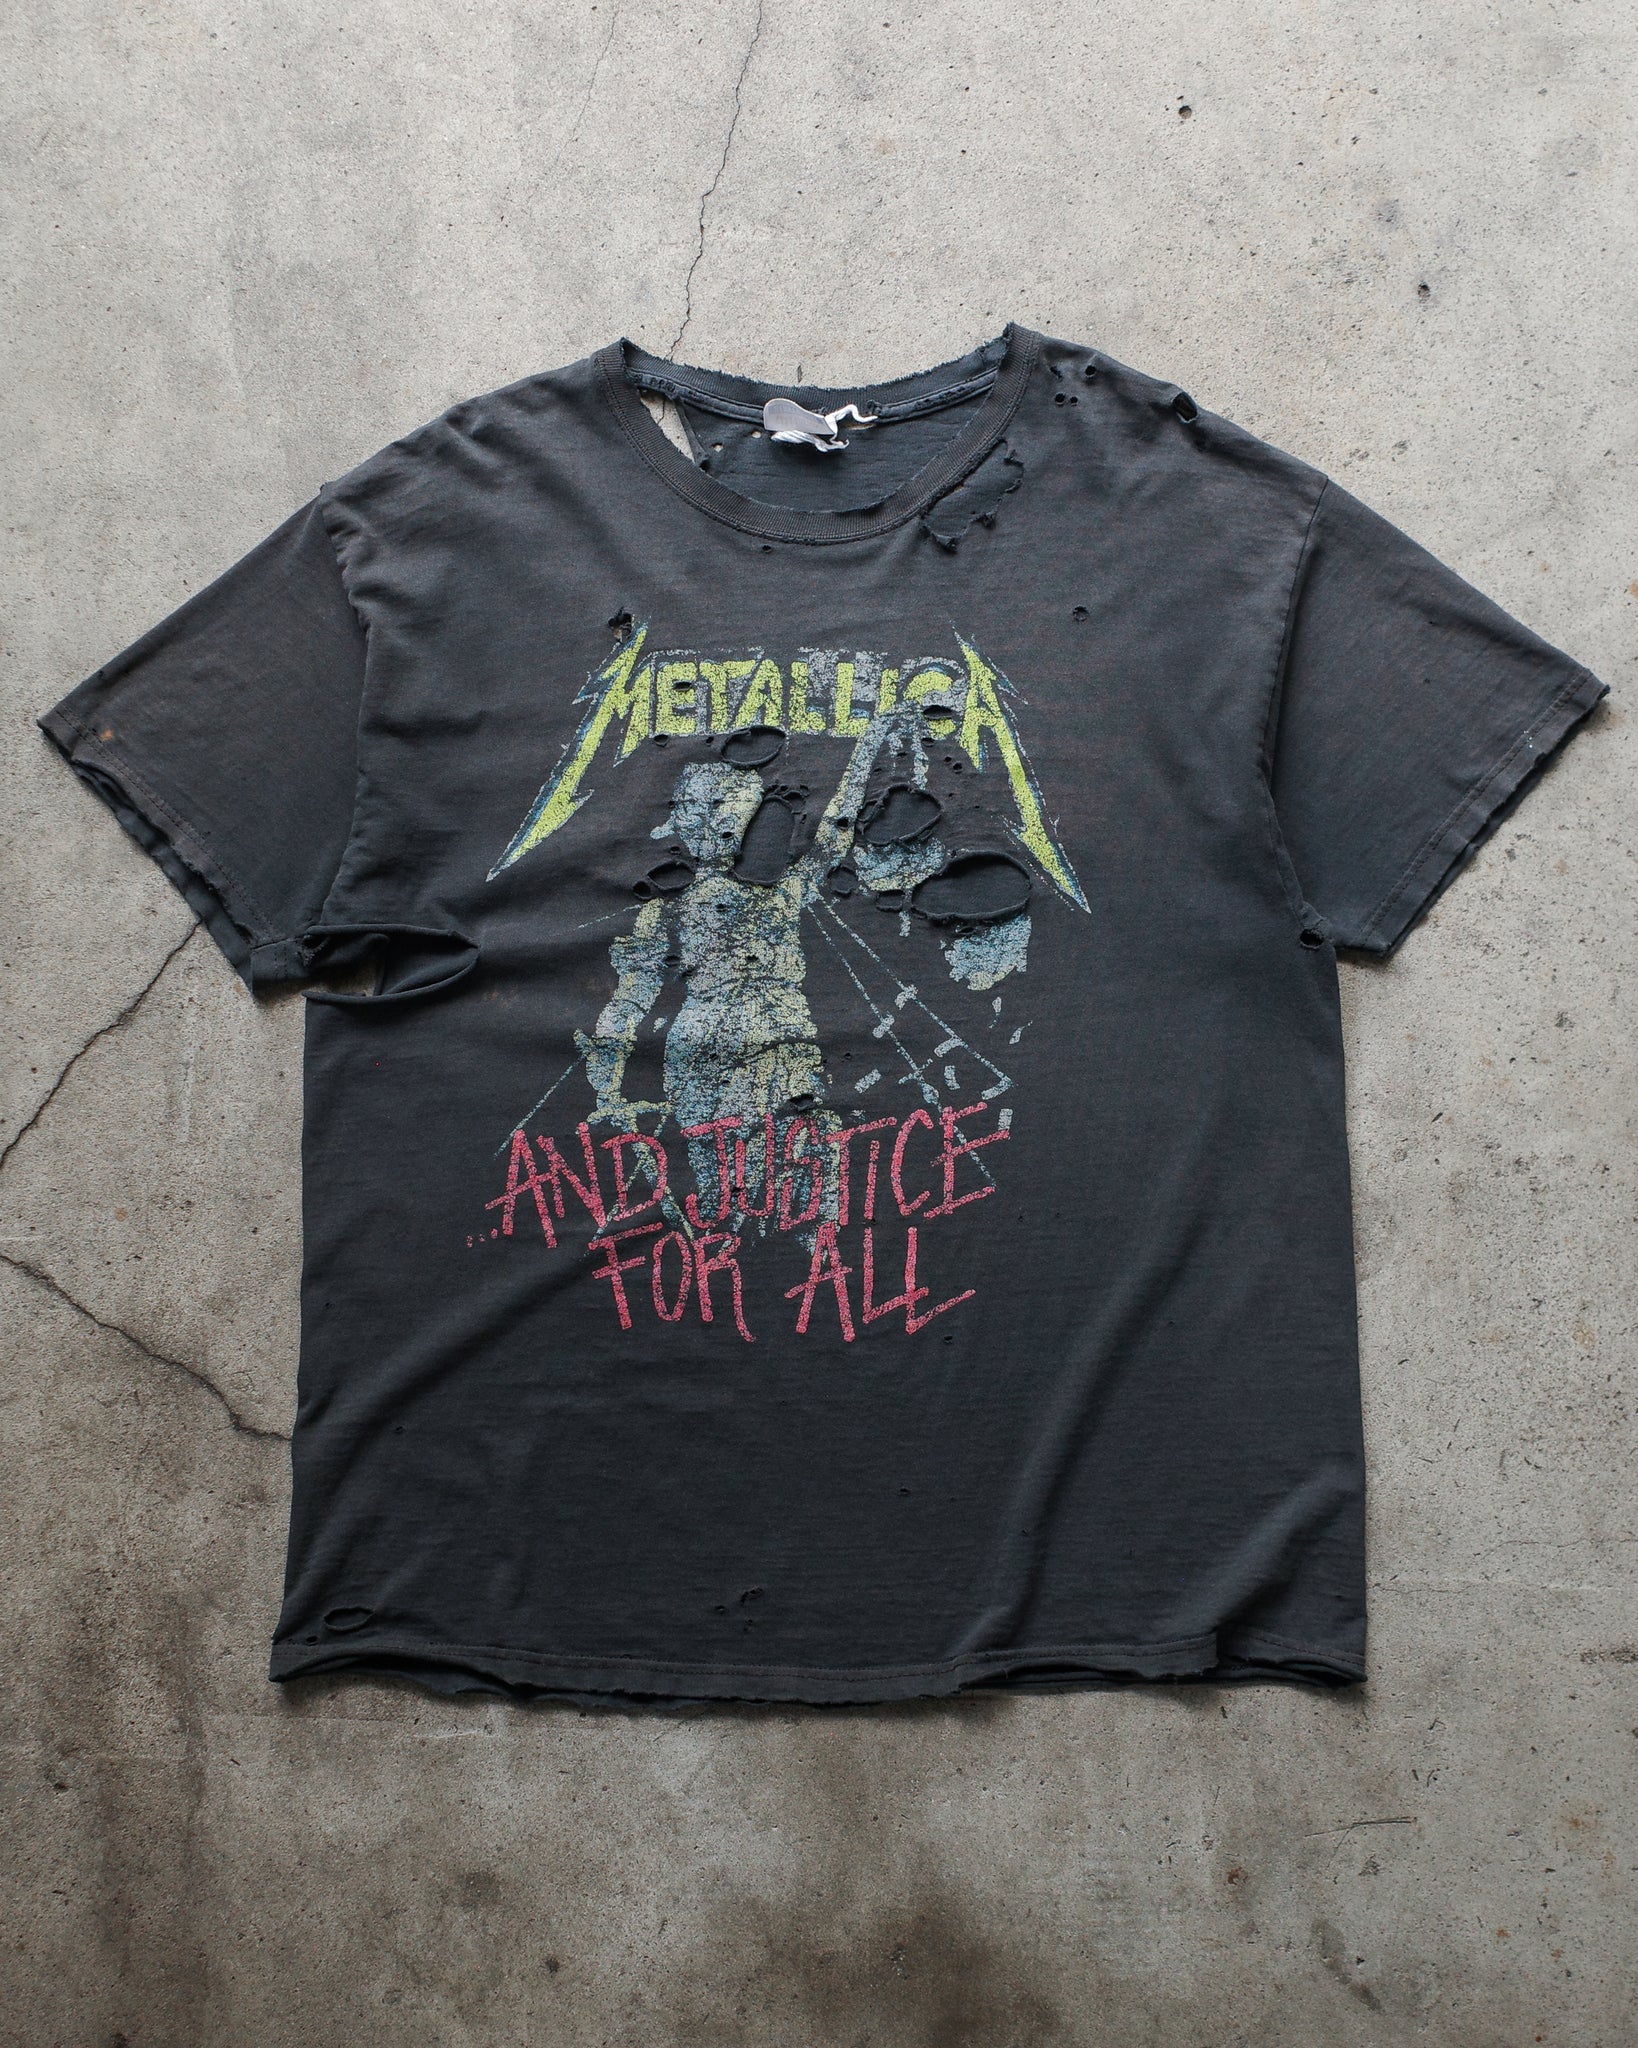 Early 2000s Metallica "And Justice for All" Thrashed Tee